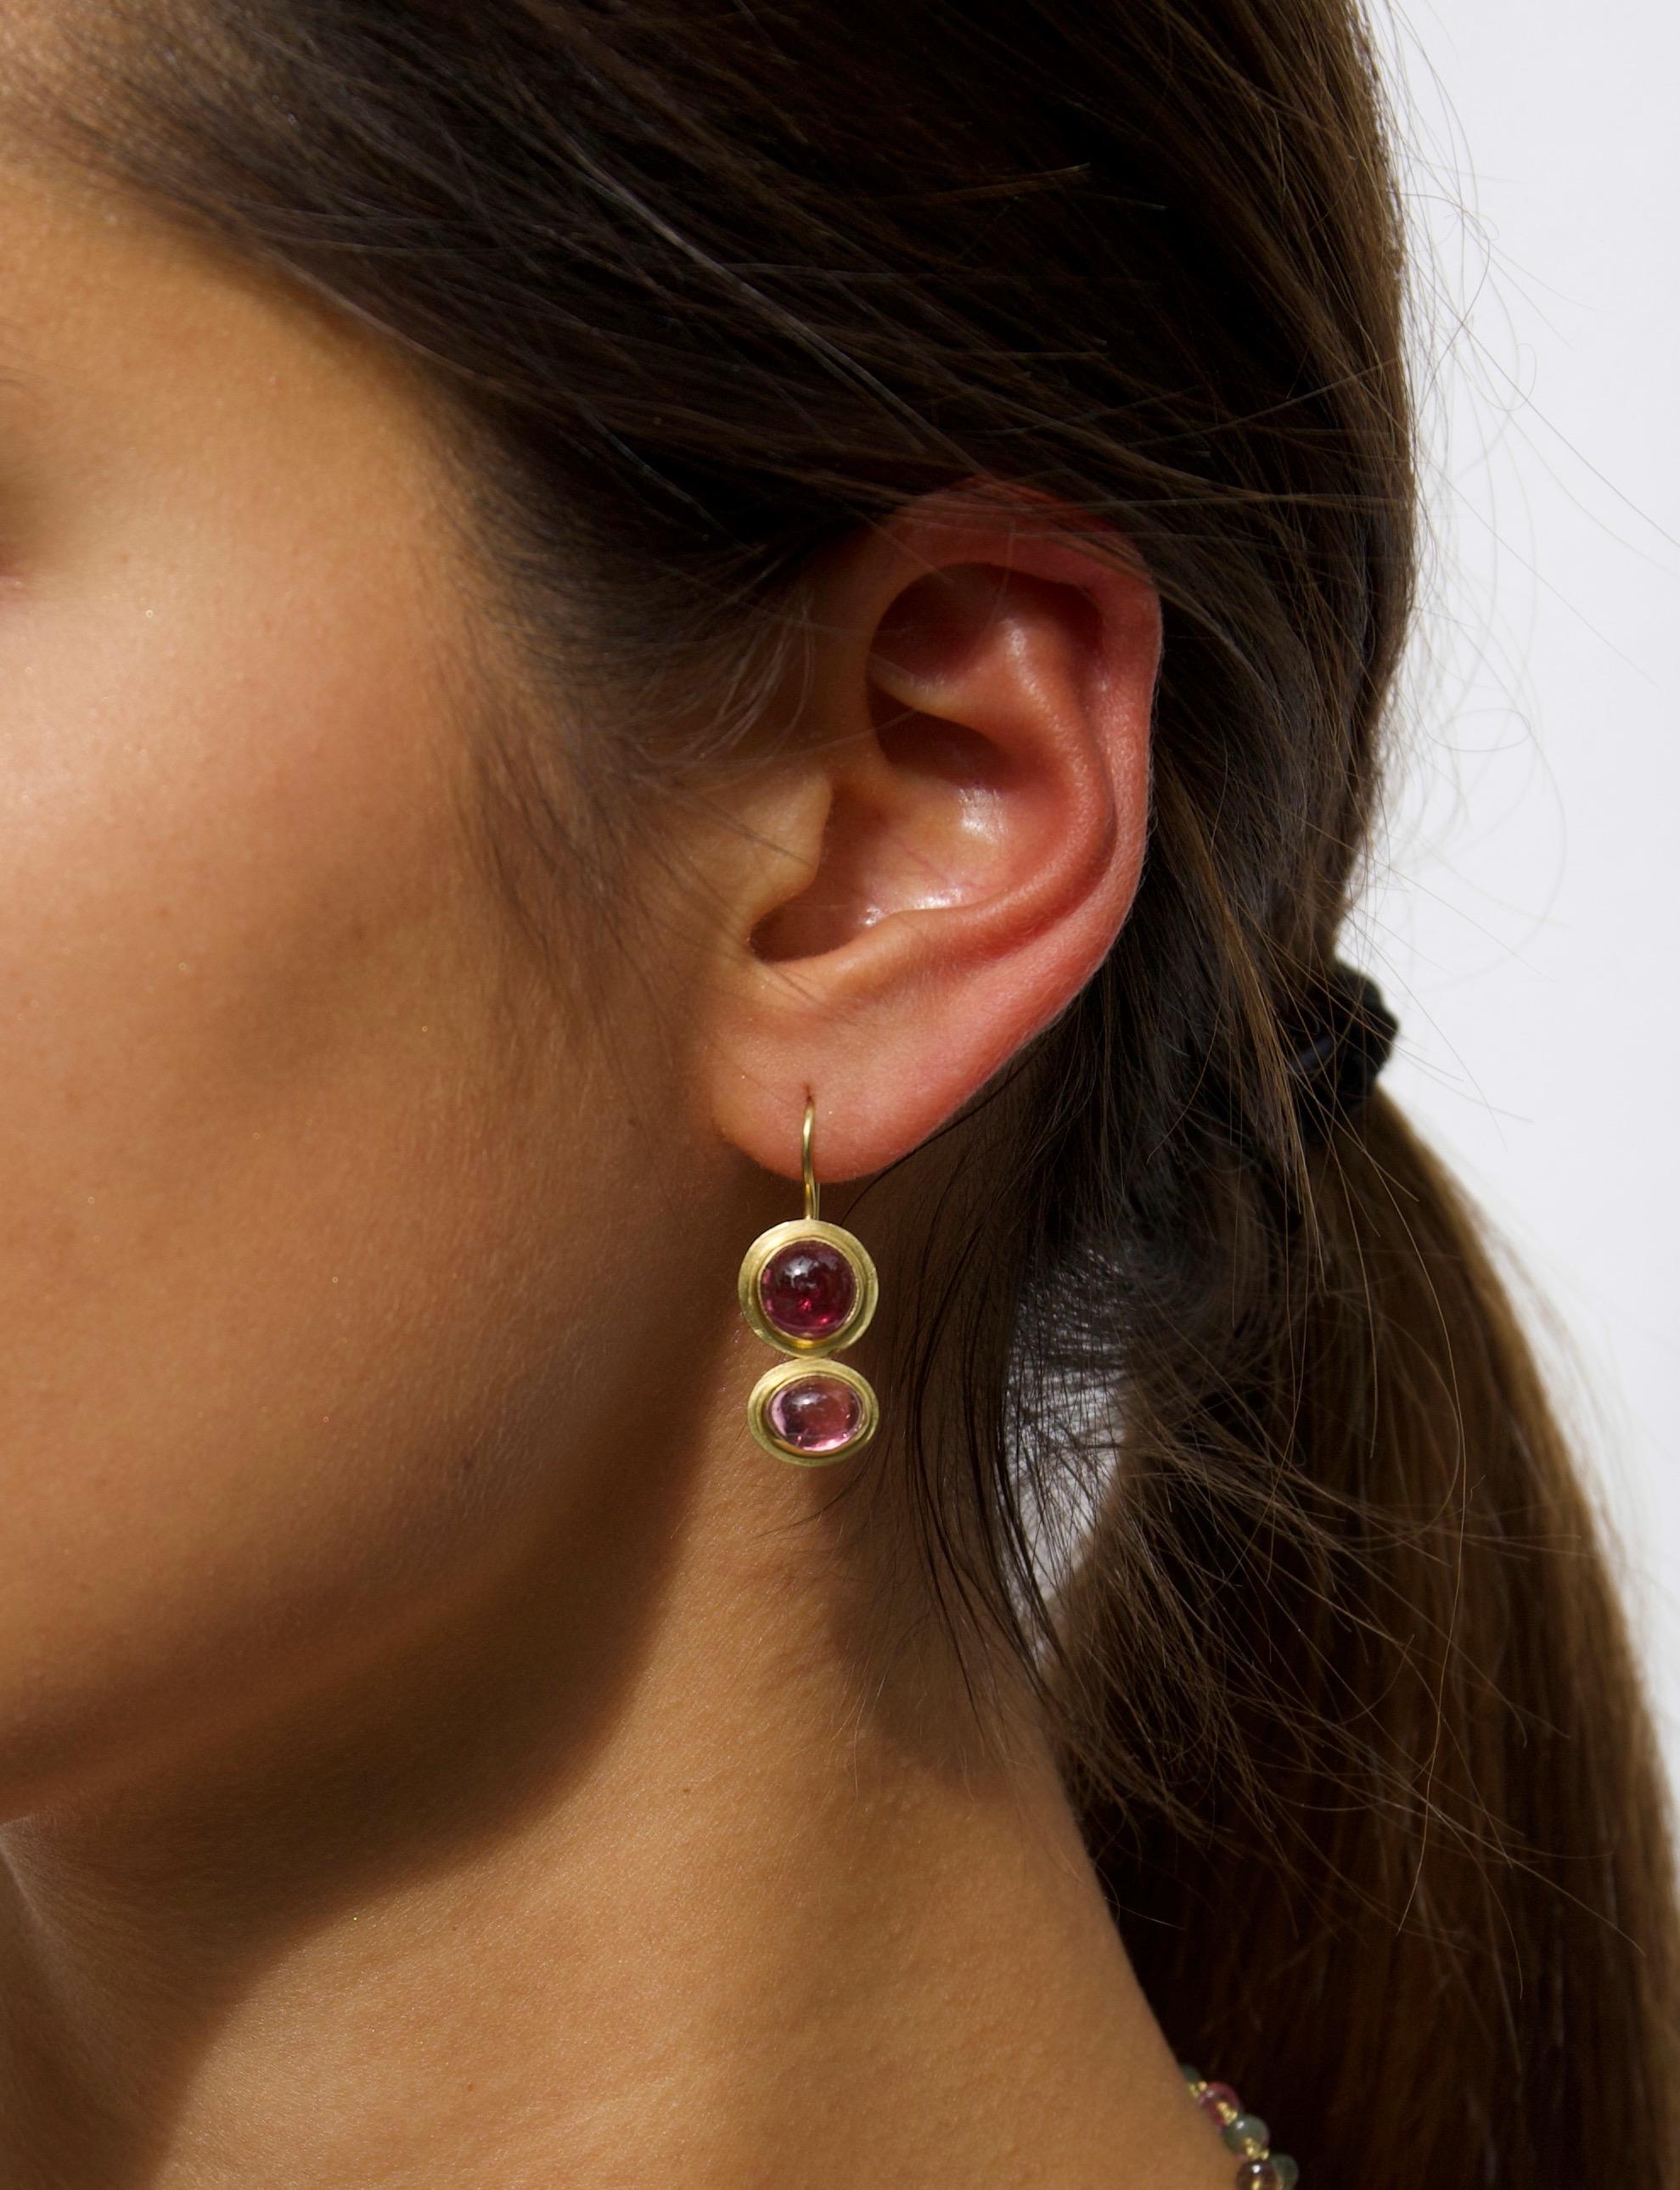 These 18k gold earrings with tourmalines in pale pink and deep magenta color are feminine, dainty, and very comfortable to wear. The perfect choice of jewelry to wear all day. The stunning and sumptuous pink tourmalines add a touch of color without